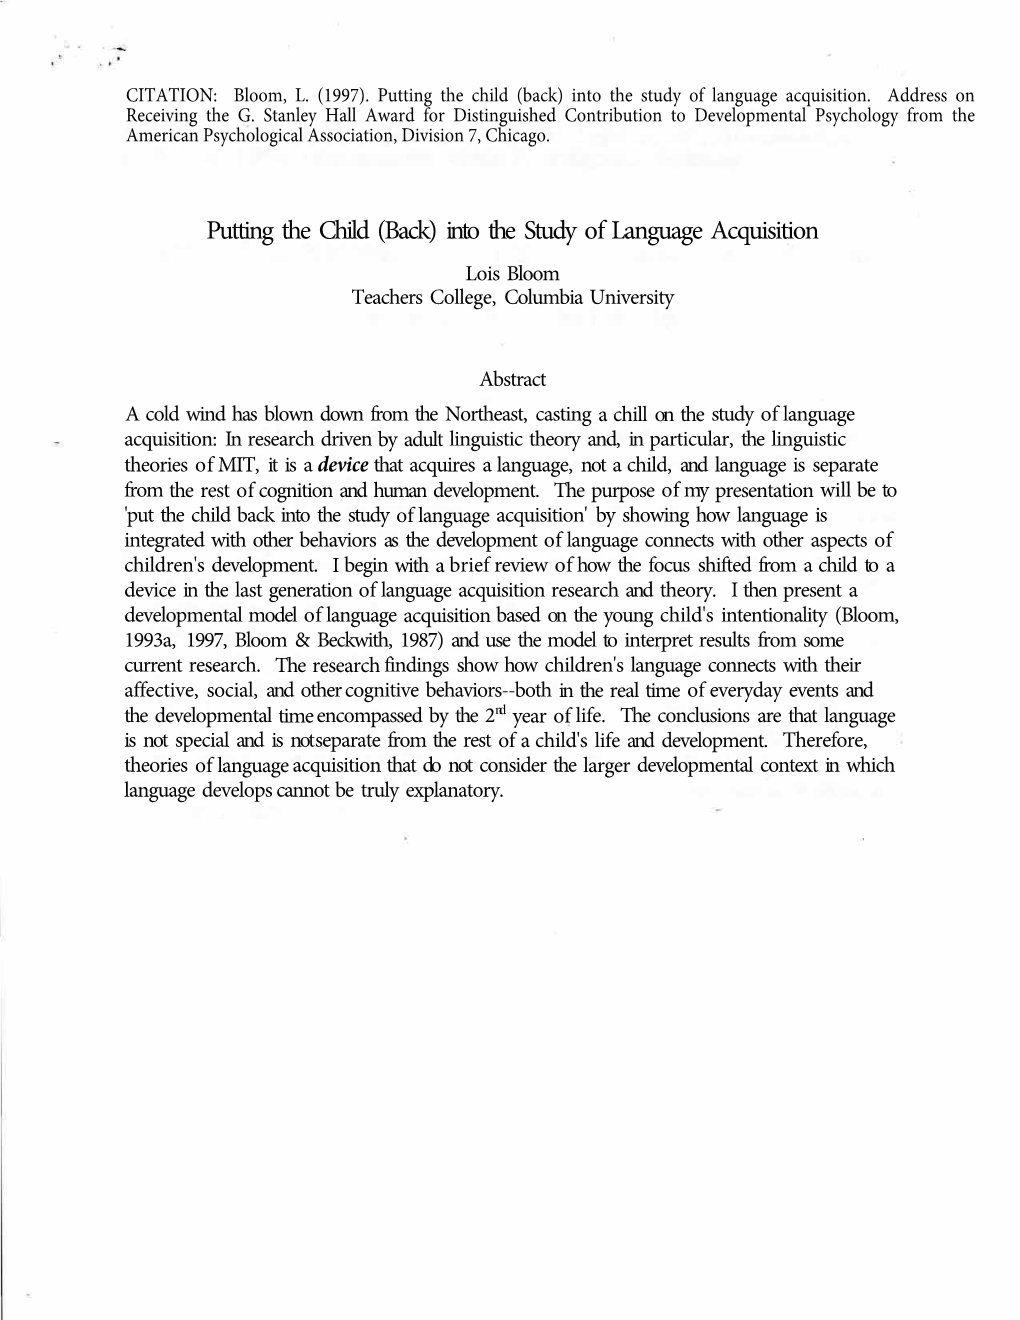 Into the Study of Language Acquisition